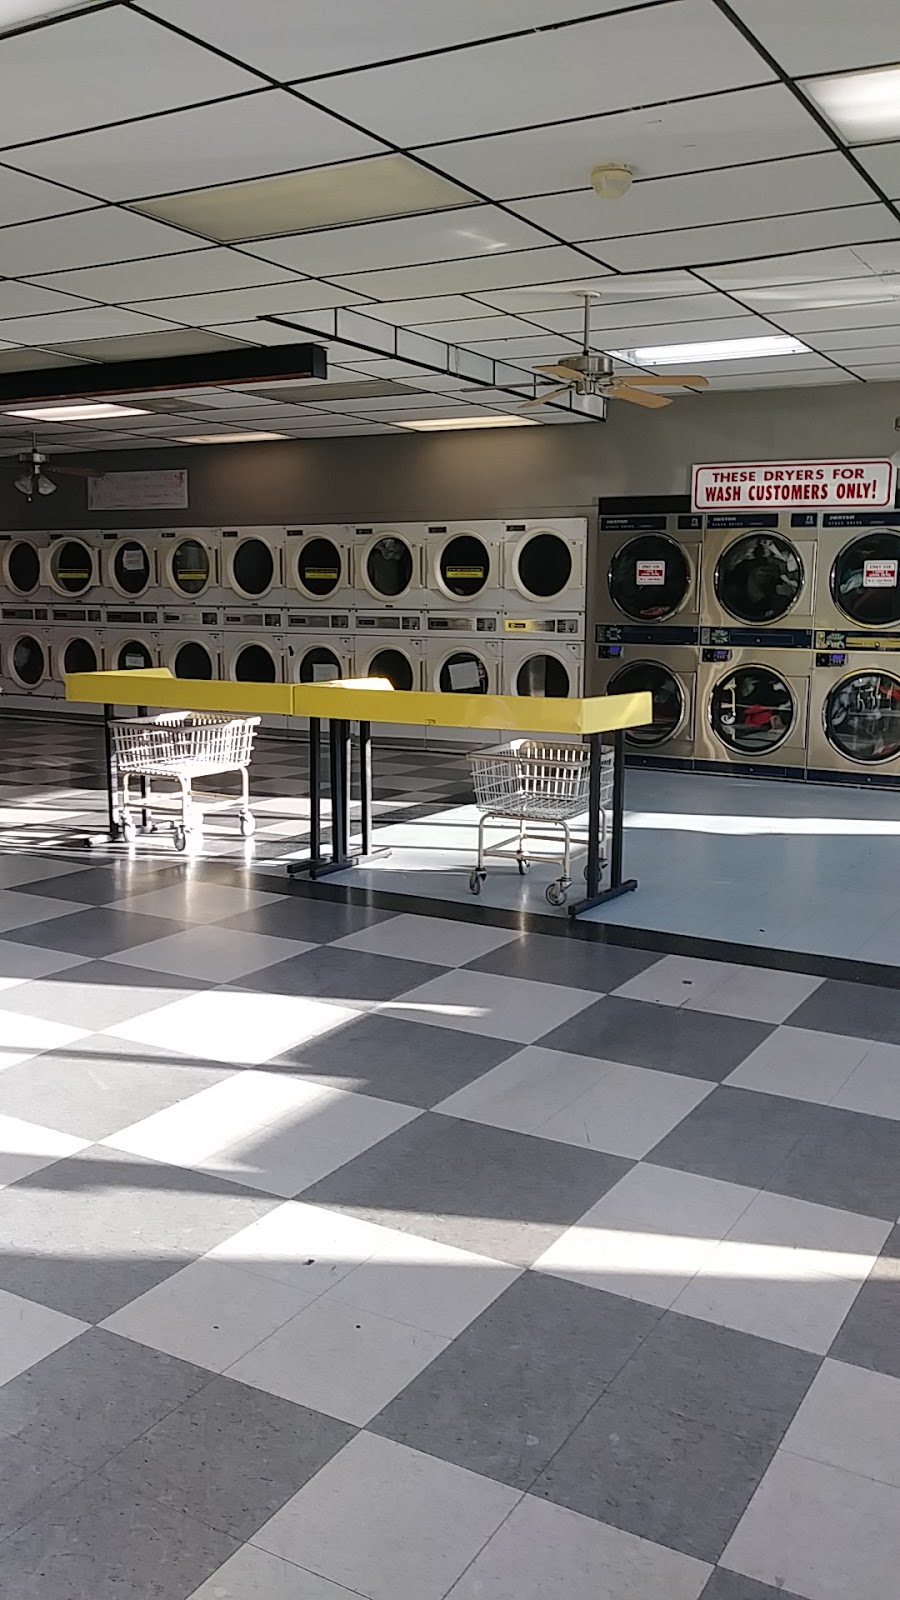 The Mat Laundromat FREE DRY CENTER and Commercial Laundry | 9426 Lorain Ave, Cleveland, OH 44102, USA | Phone: (216) 744-7179